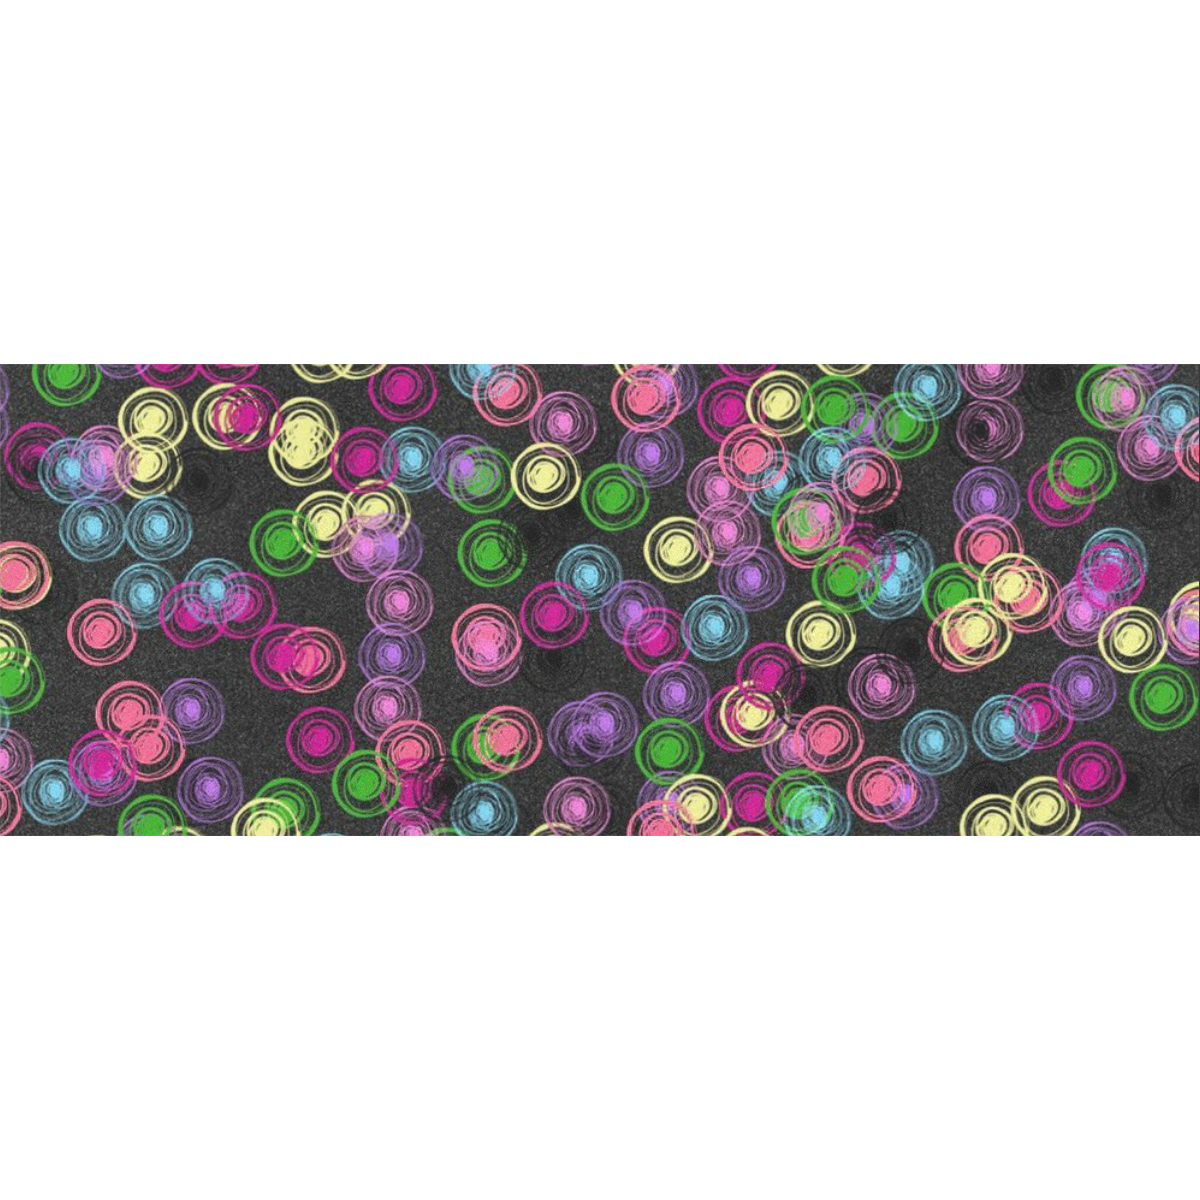 Bubbly B by FeelGood Gift Wrapping Paper 58"x 23" (5 Rolls)